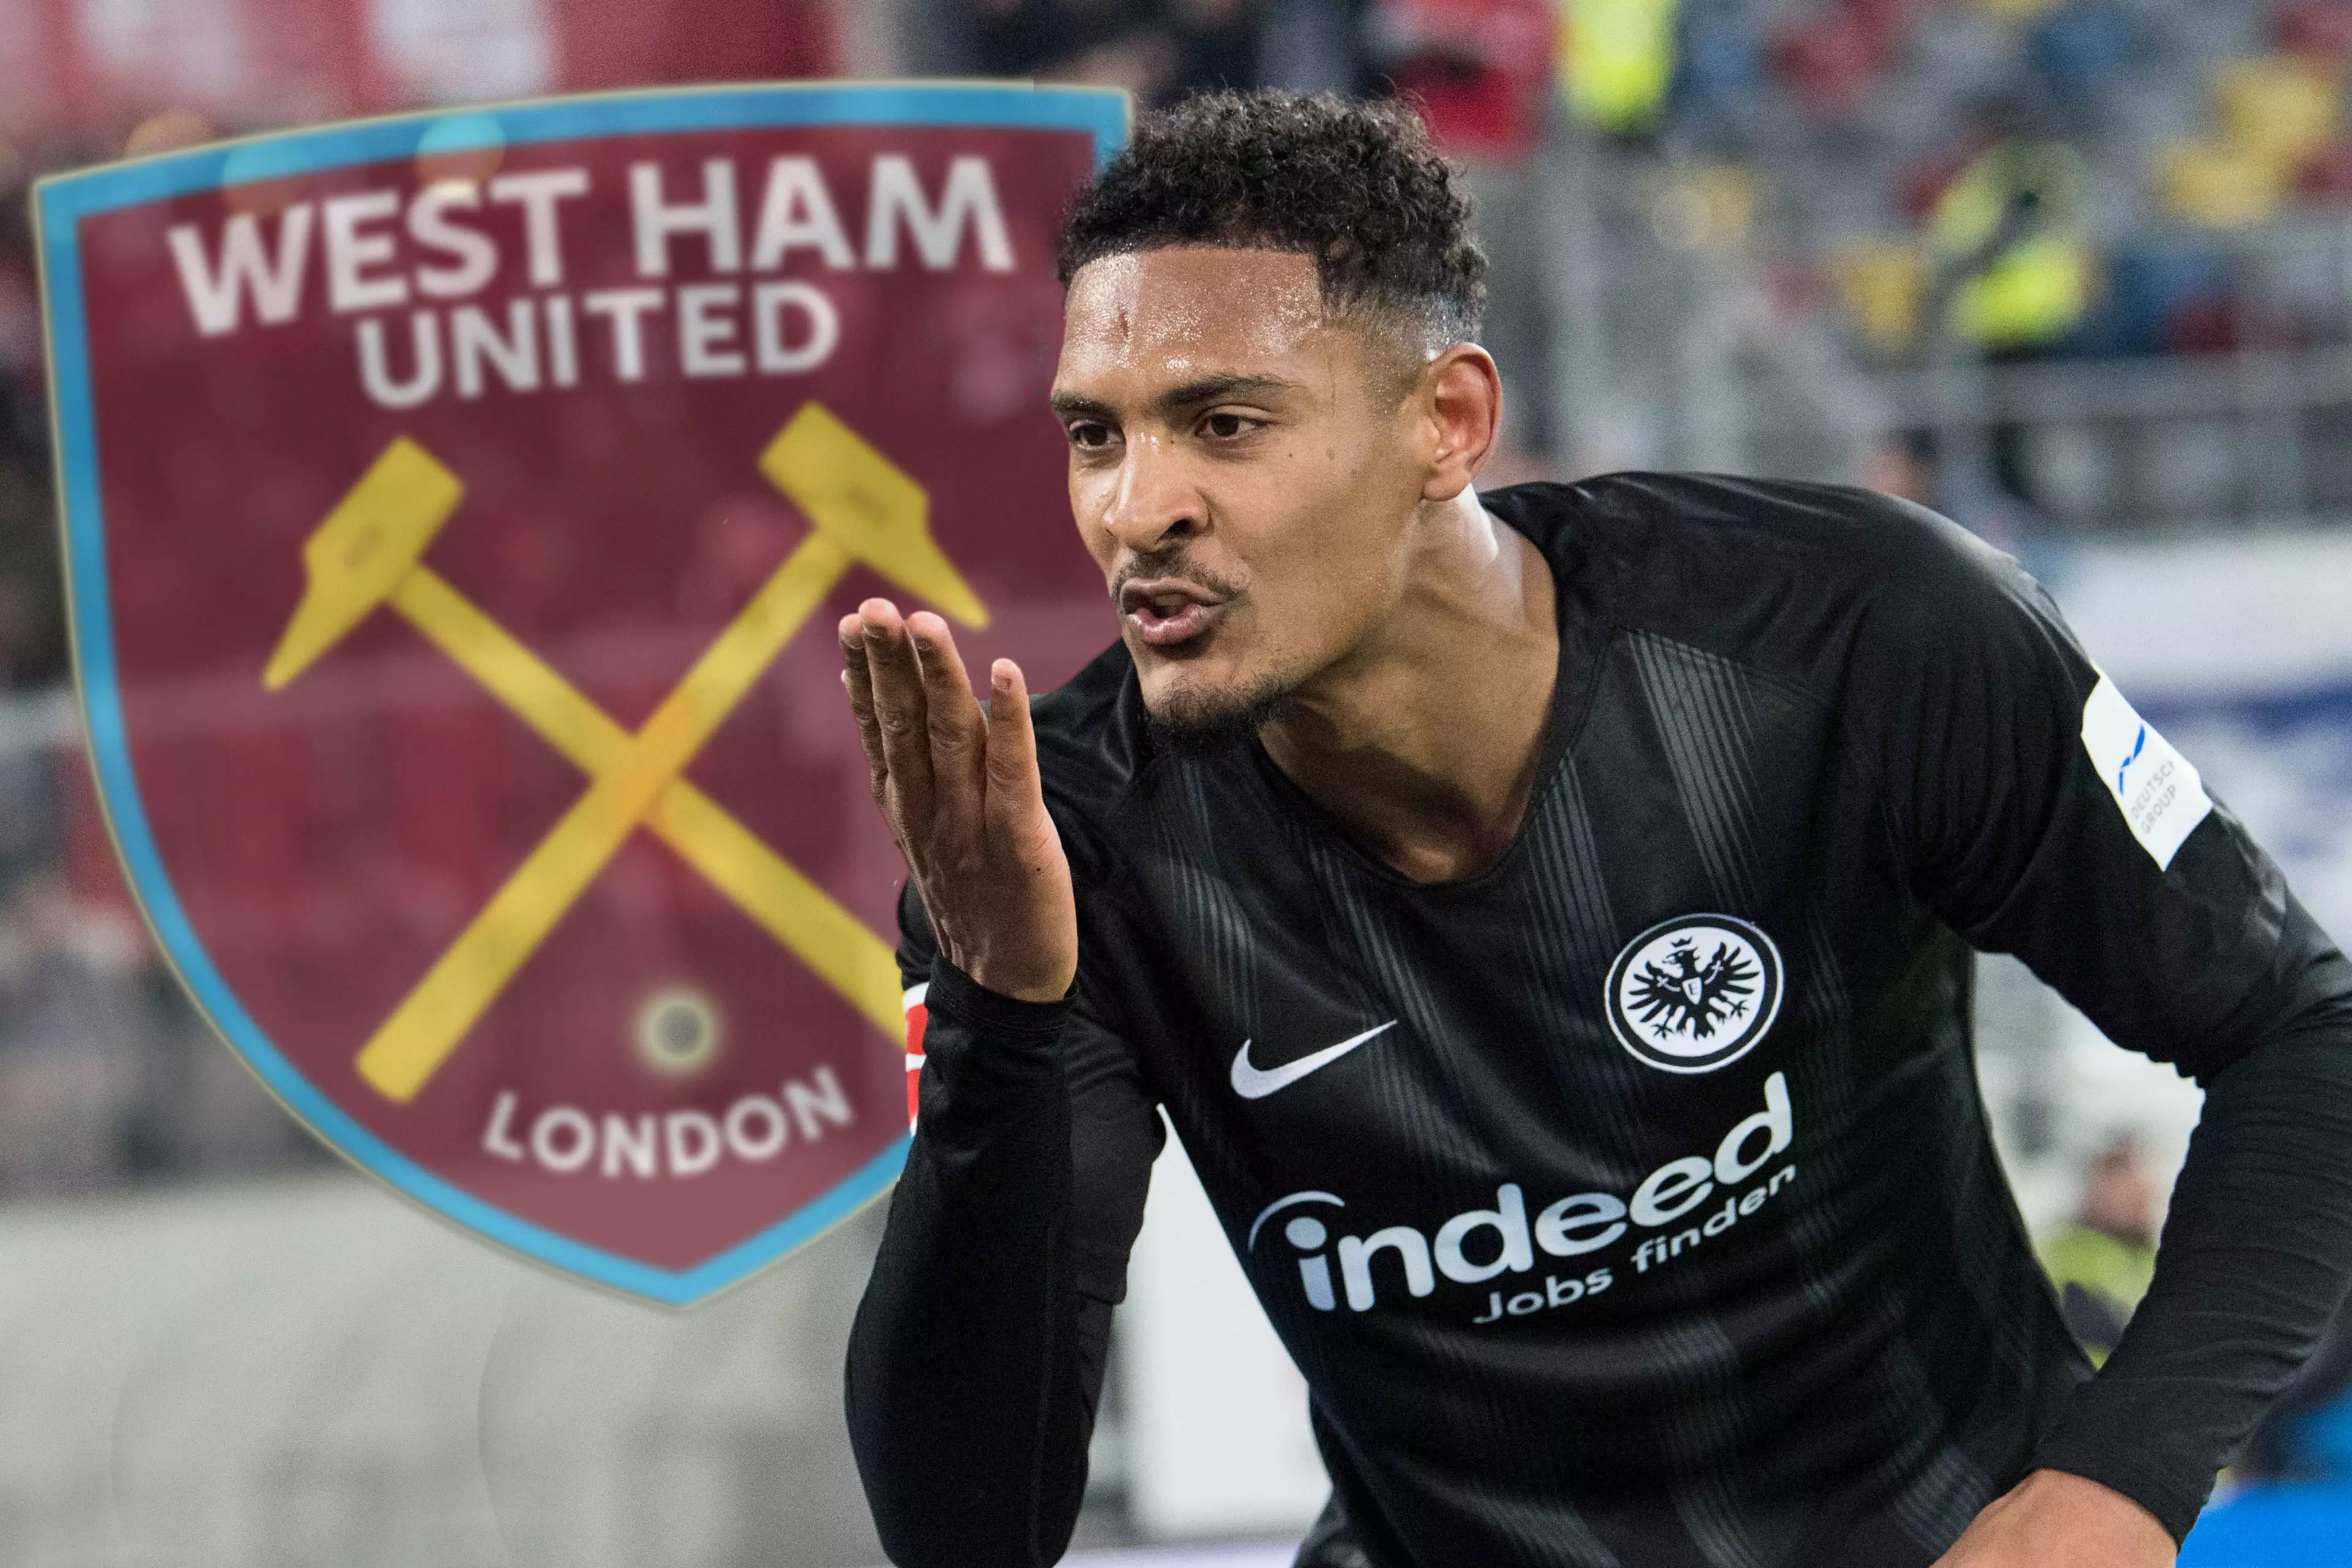 Haller could be on his way to the London Stadium. Image: PA Images